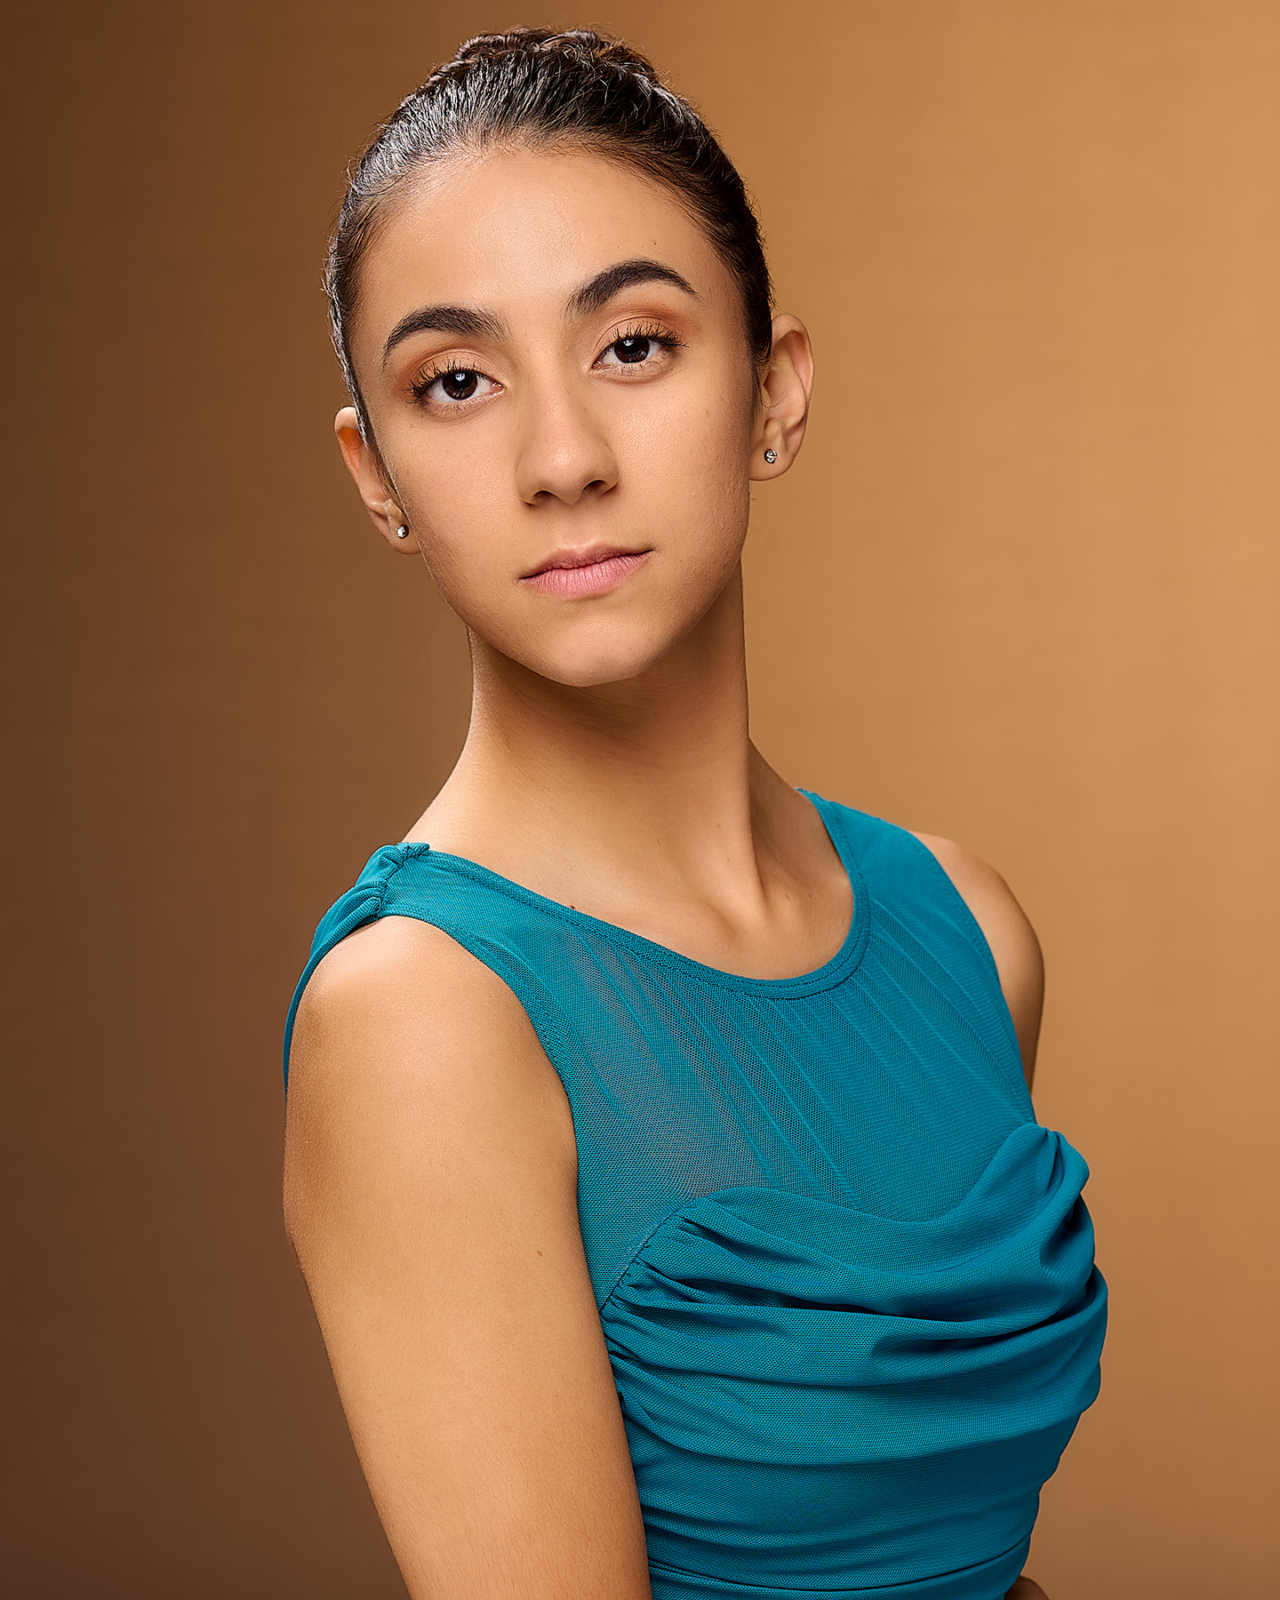 A woman dancer in a headshot in Los Angeles made by The Light Committee